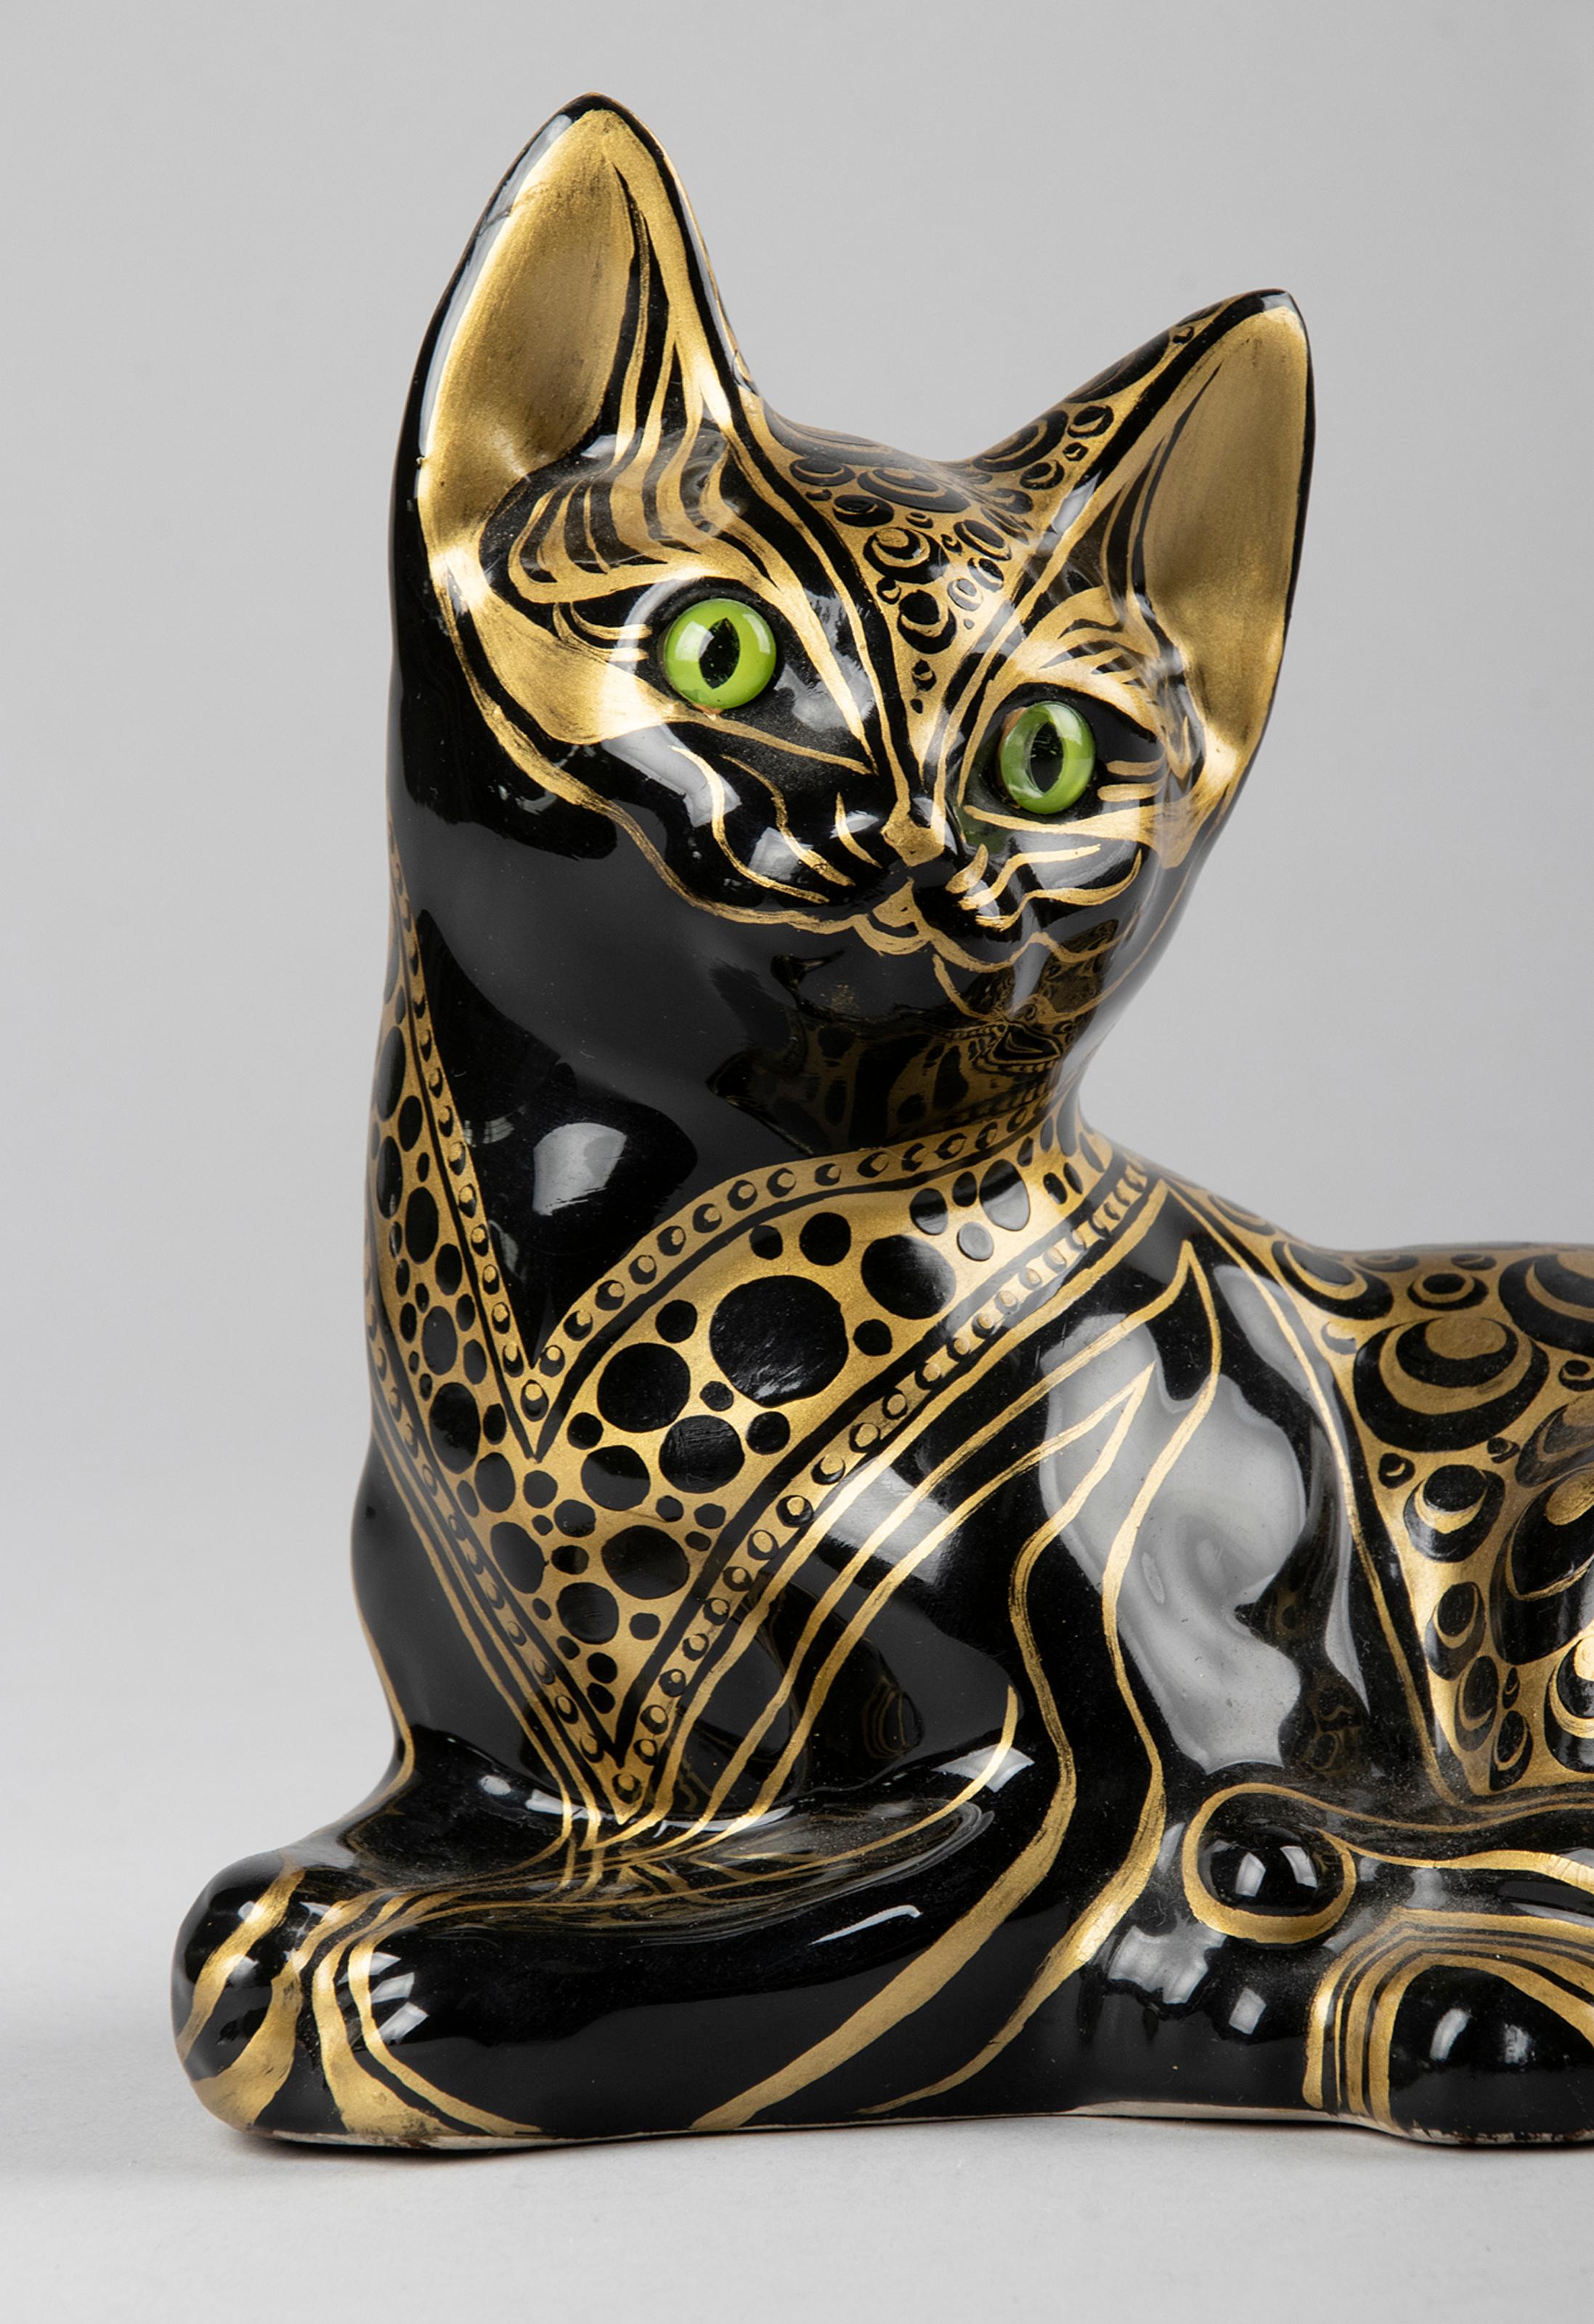 Decorative ceramic statue of a black cat. The statue is hand painted with gold accents. The cat has glass eyes. The object is not marked, the maker is unknown.